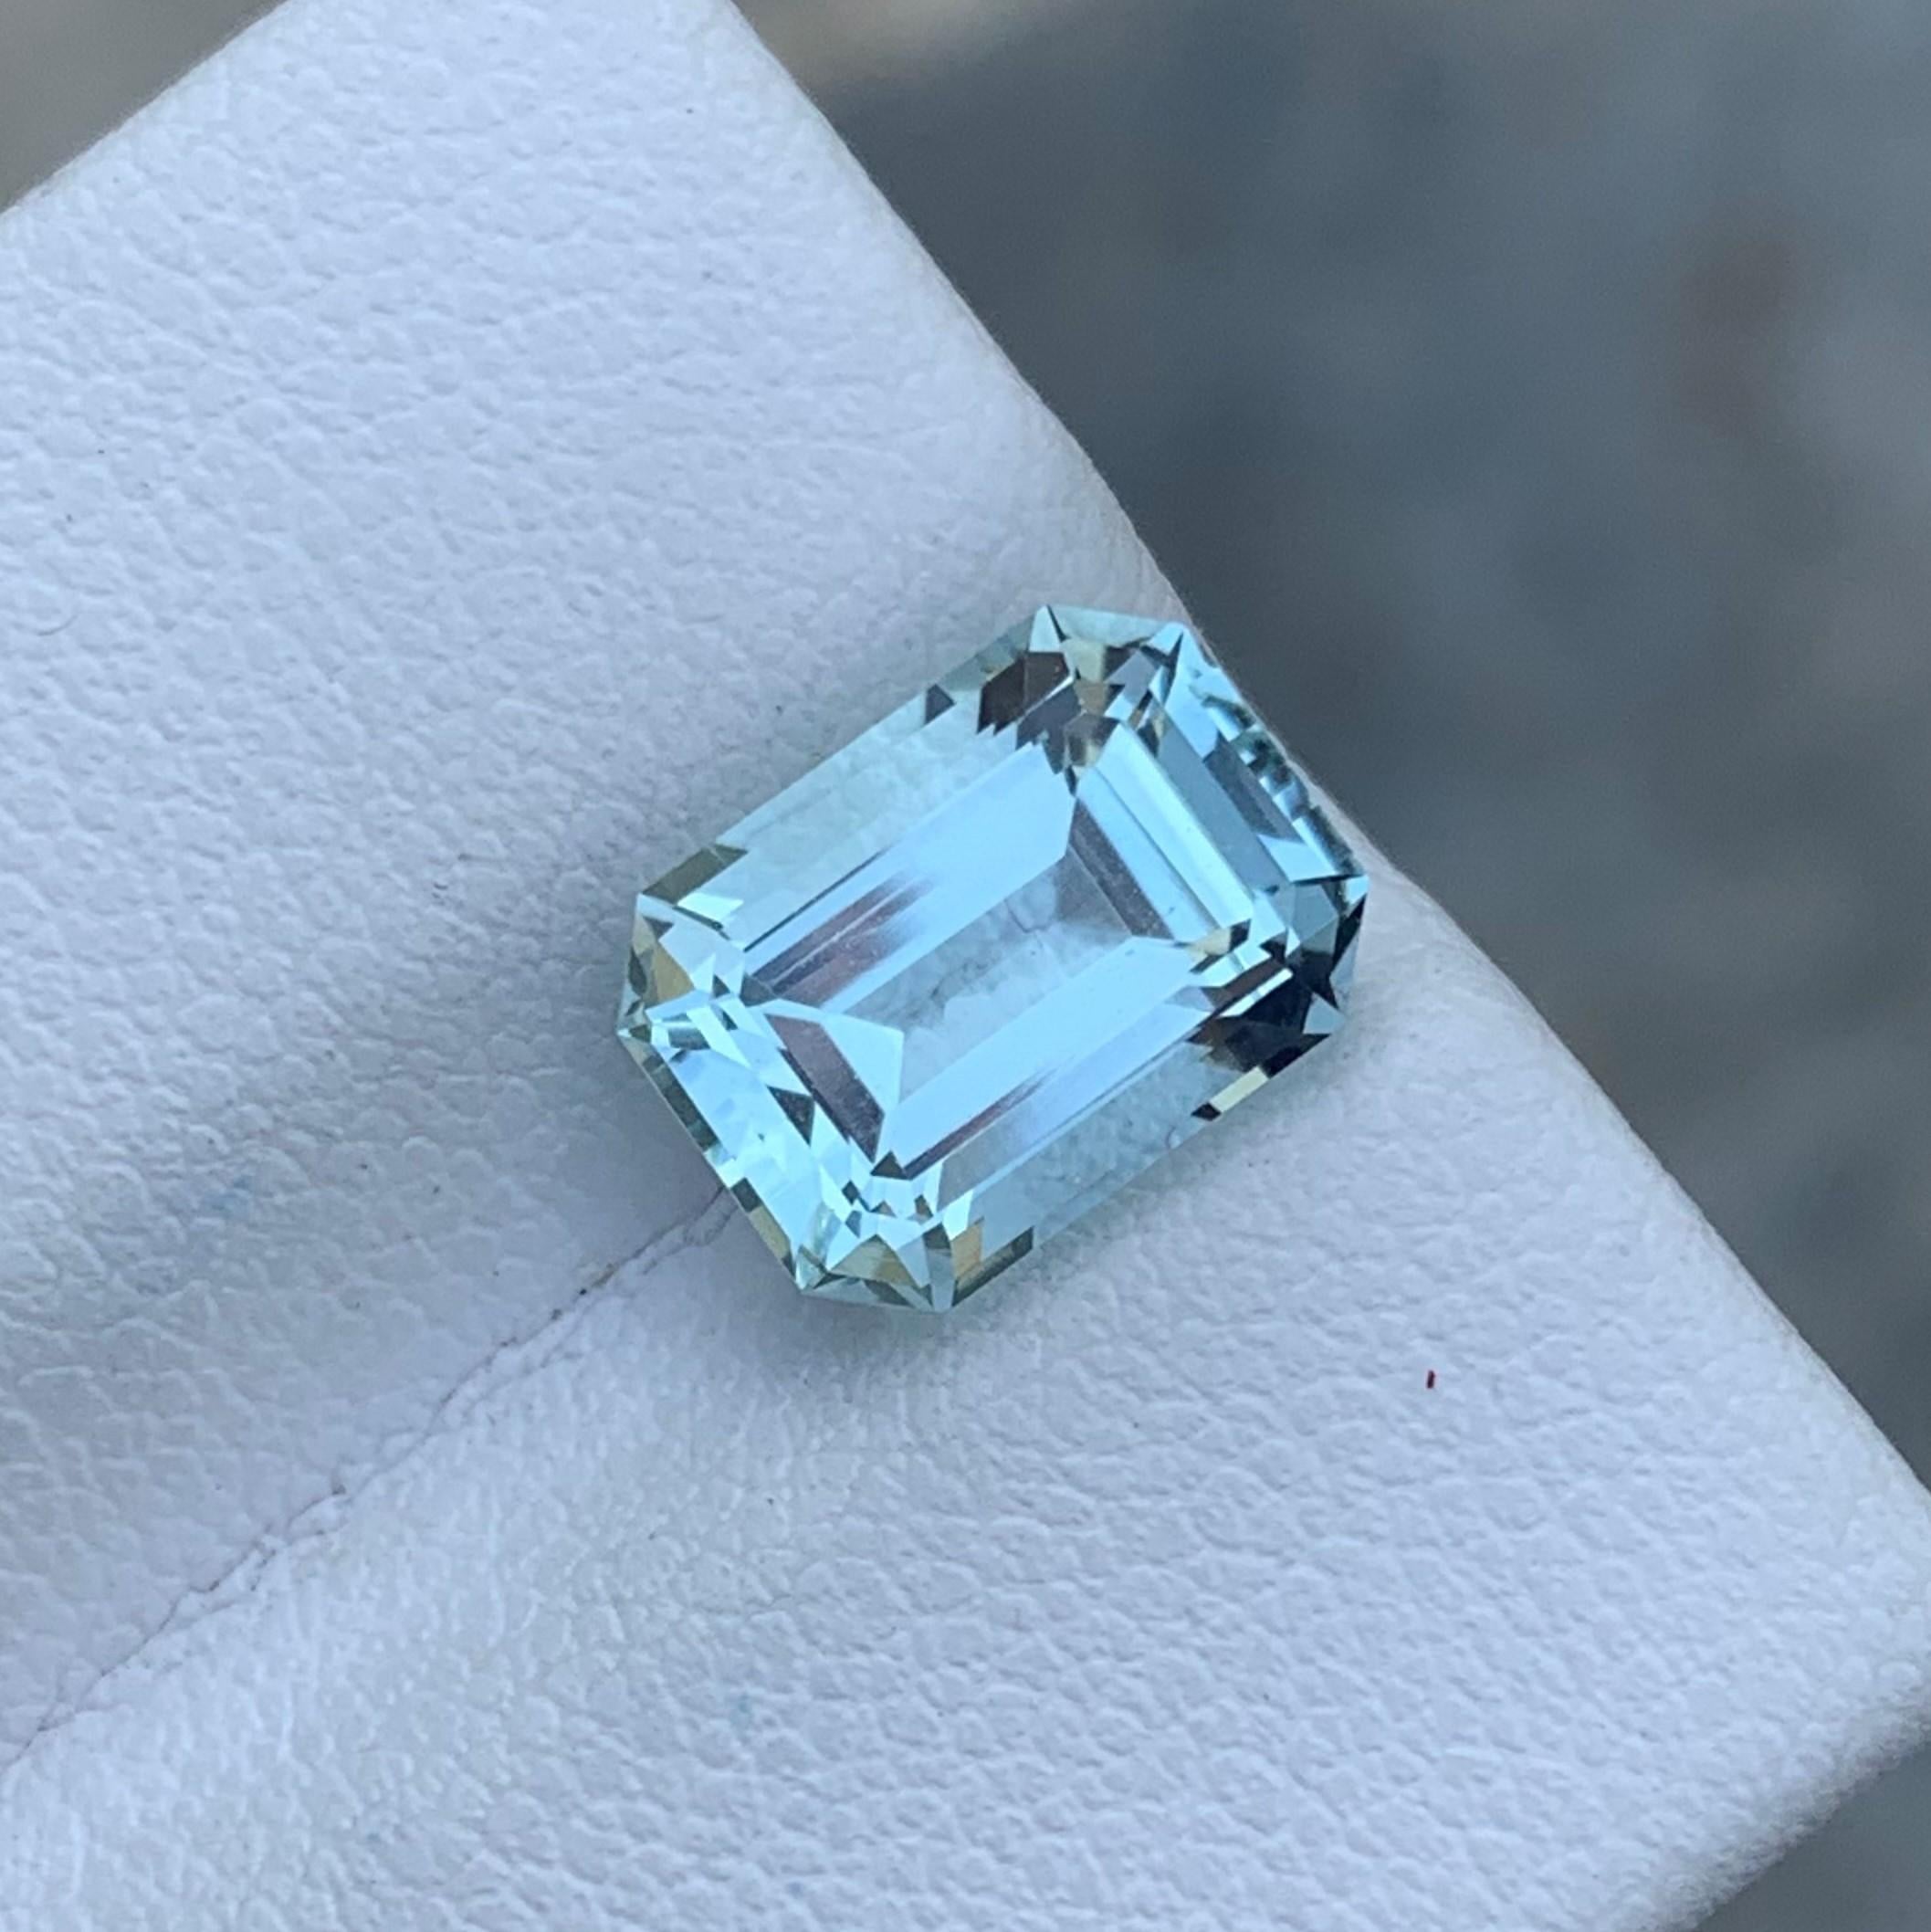 Faceted Aquamarine
Weight: 2.85 Carats
Dimension: 9.7x7.2x5.8 Mm
Origin: Shigar Valley Pakistan
Color: Seafoam / Light Blue
Birth Month: March
Shape: Emerald
Treatment: Non
Certificate: On Demand
Some basic benefits of wearing Aquamarine